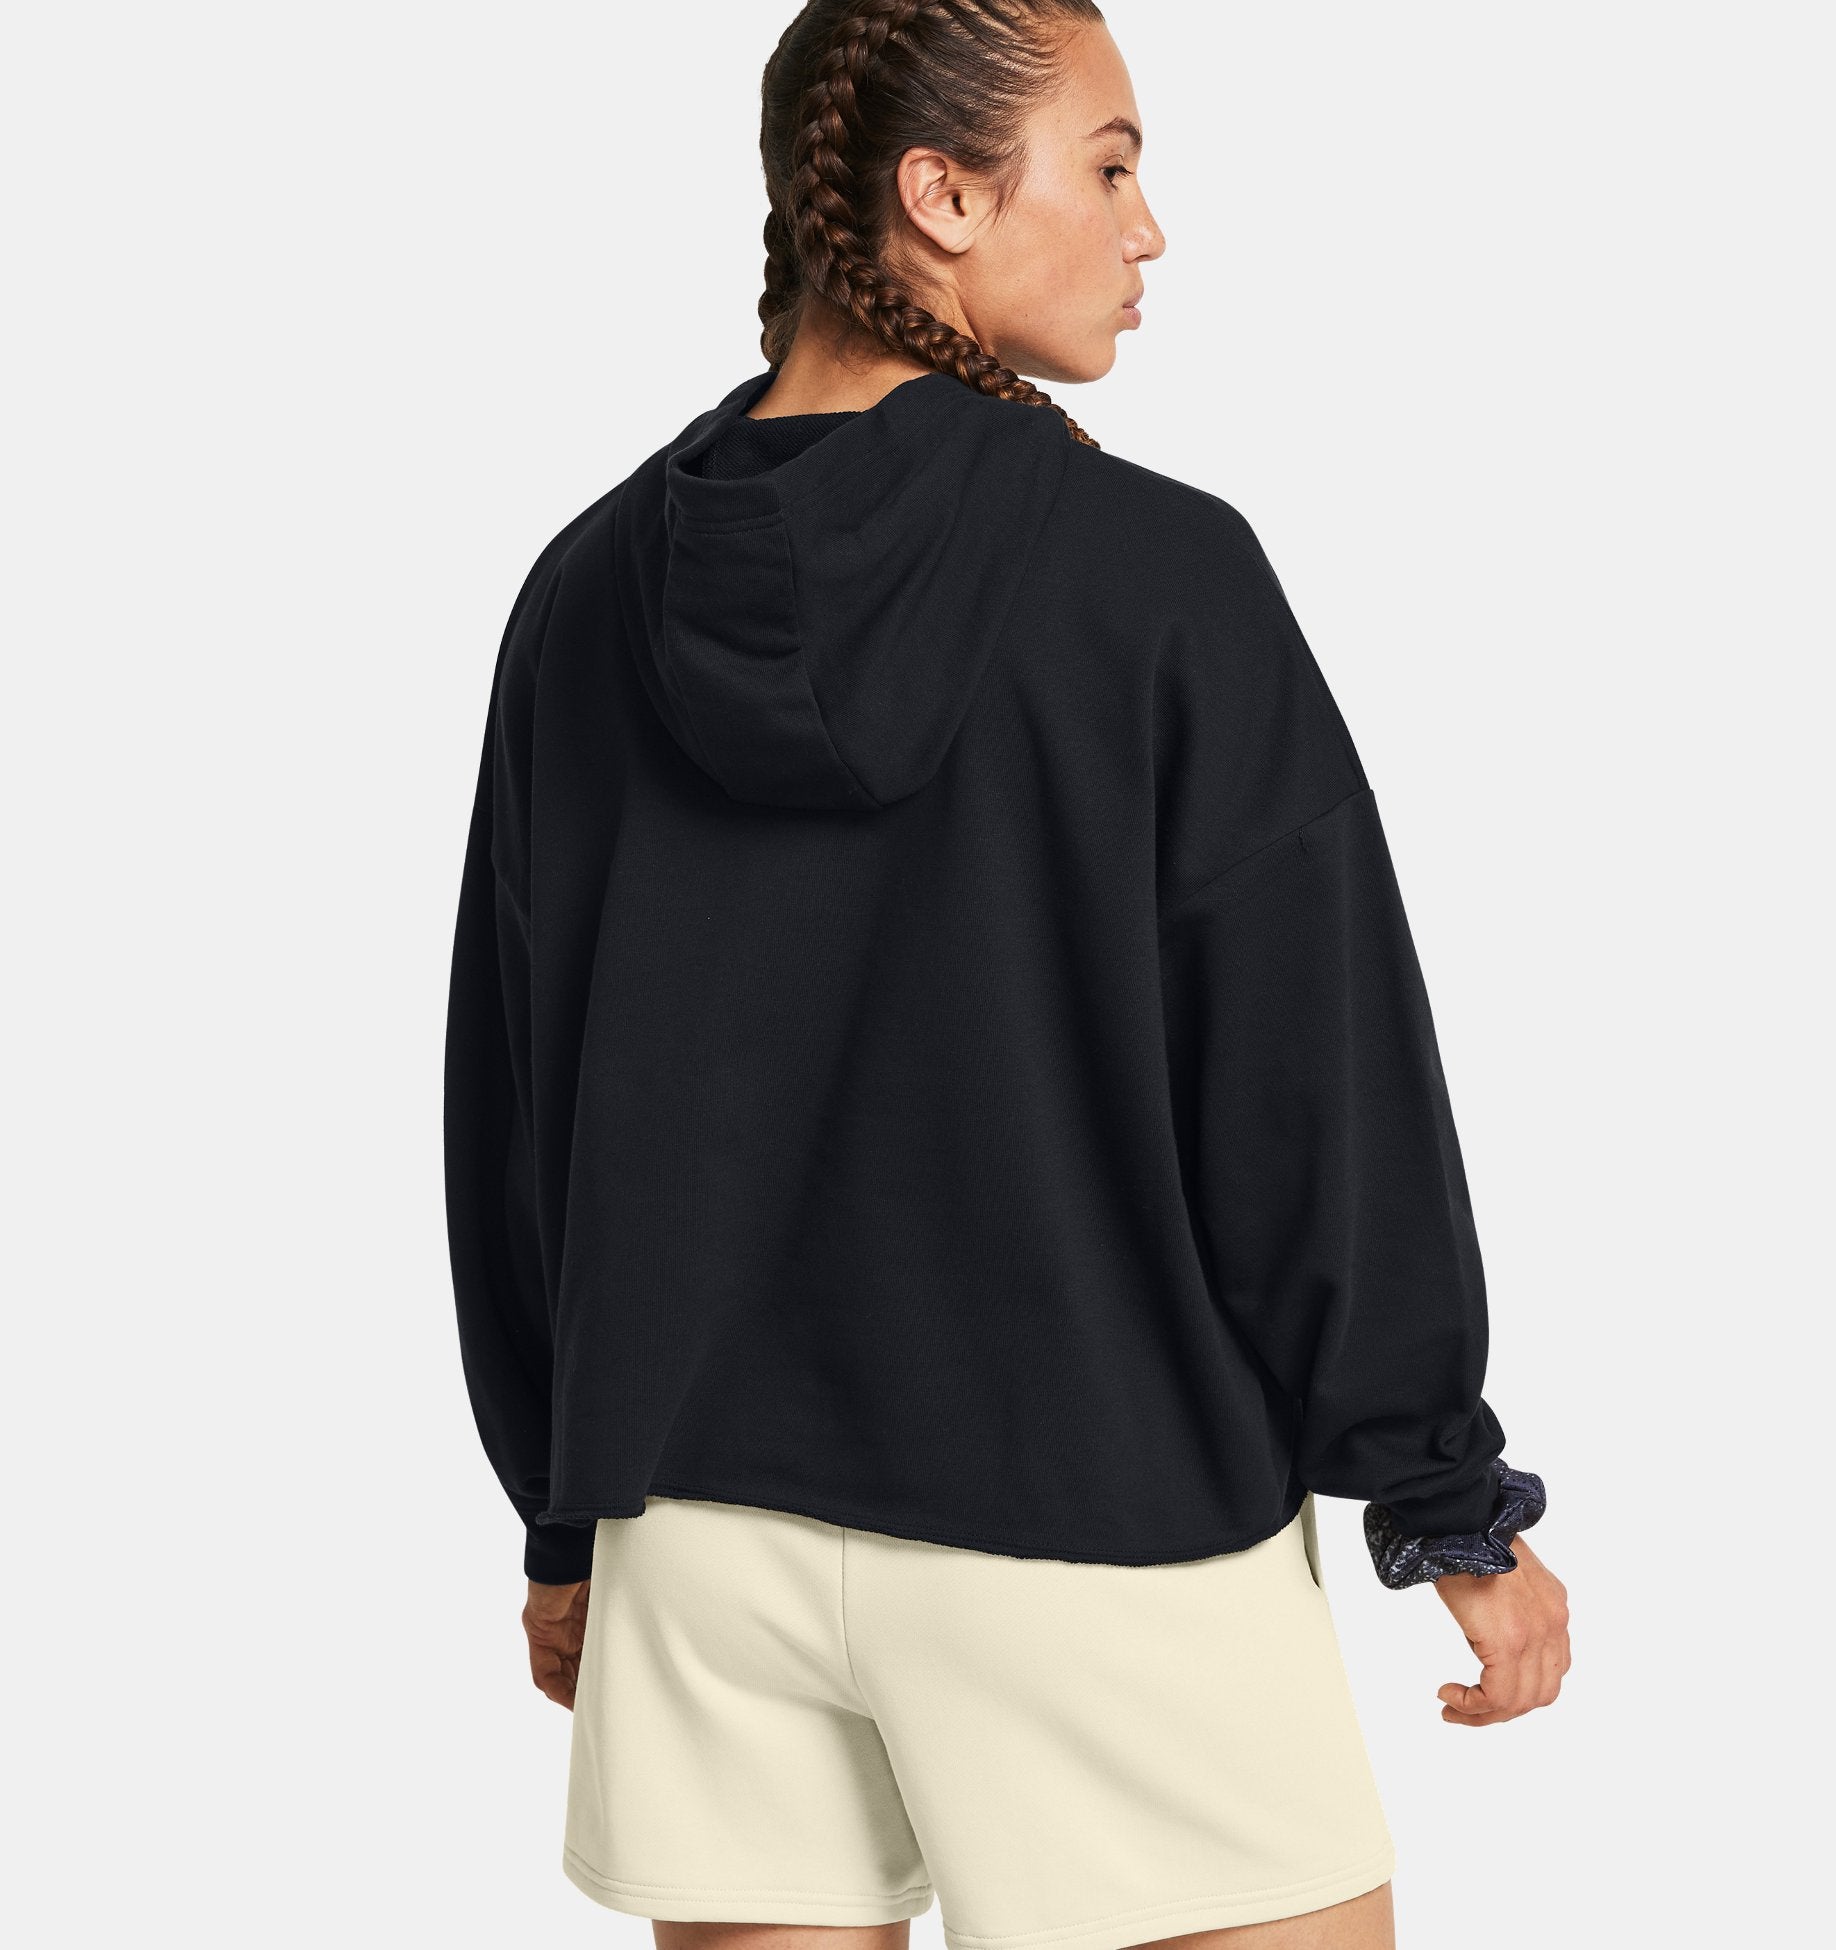 UA Rival Terry Oversized Hoodie